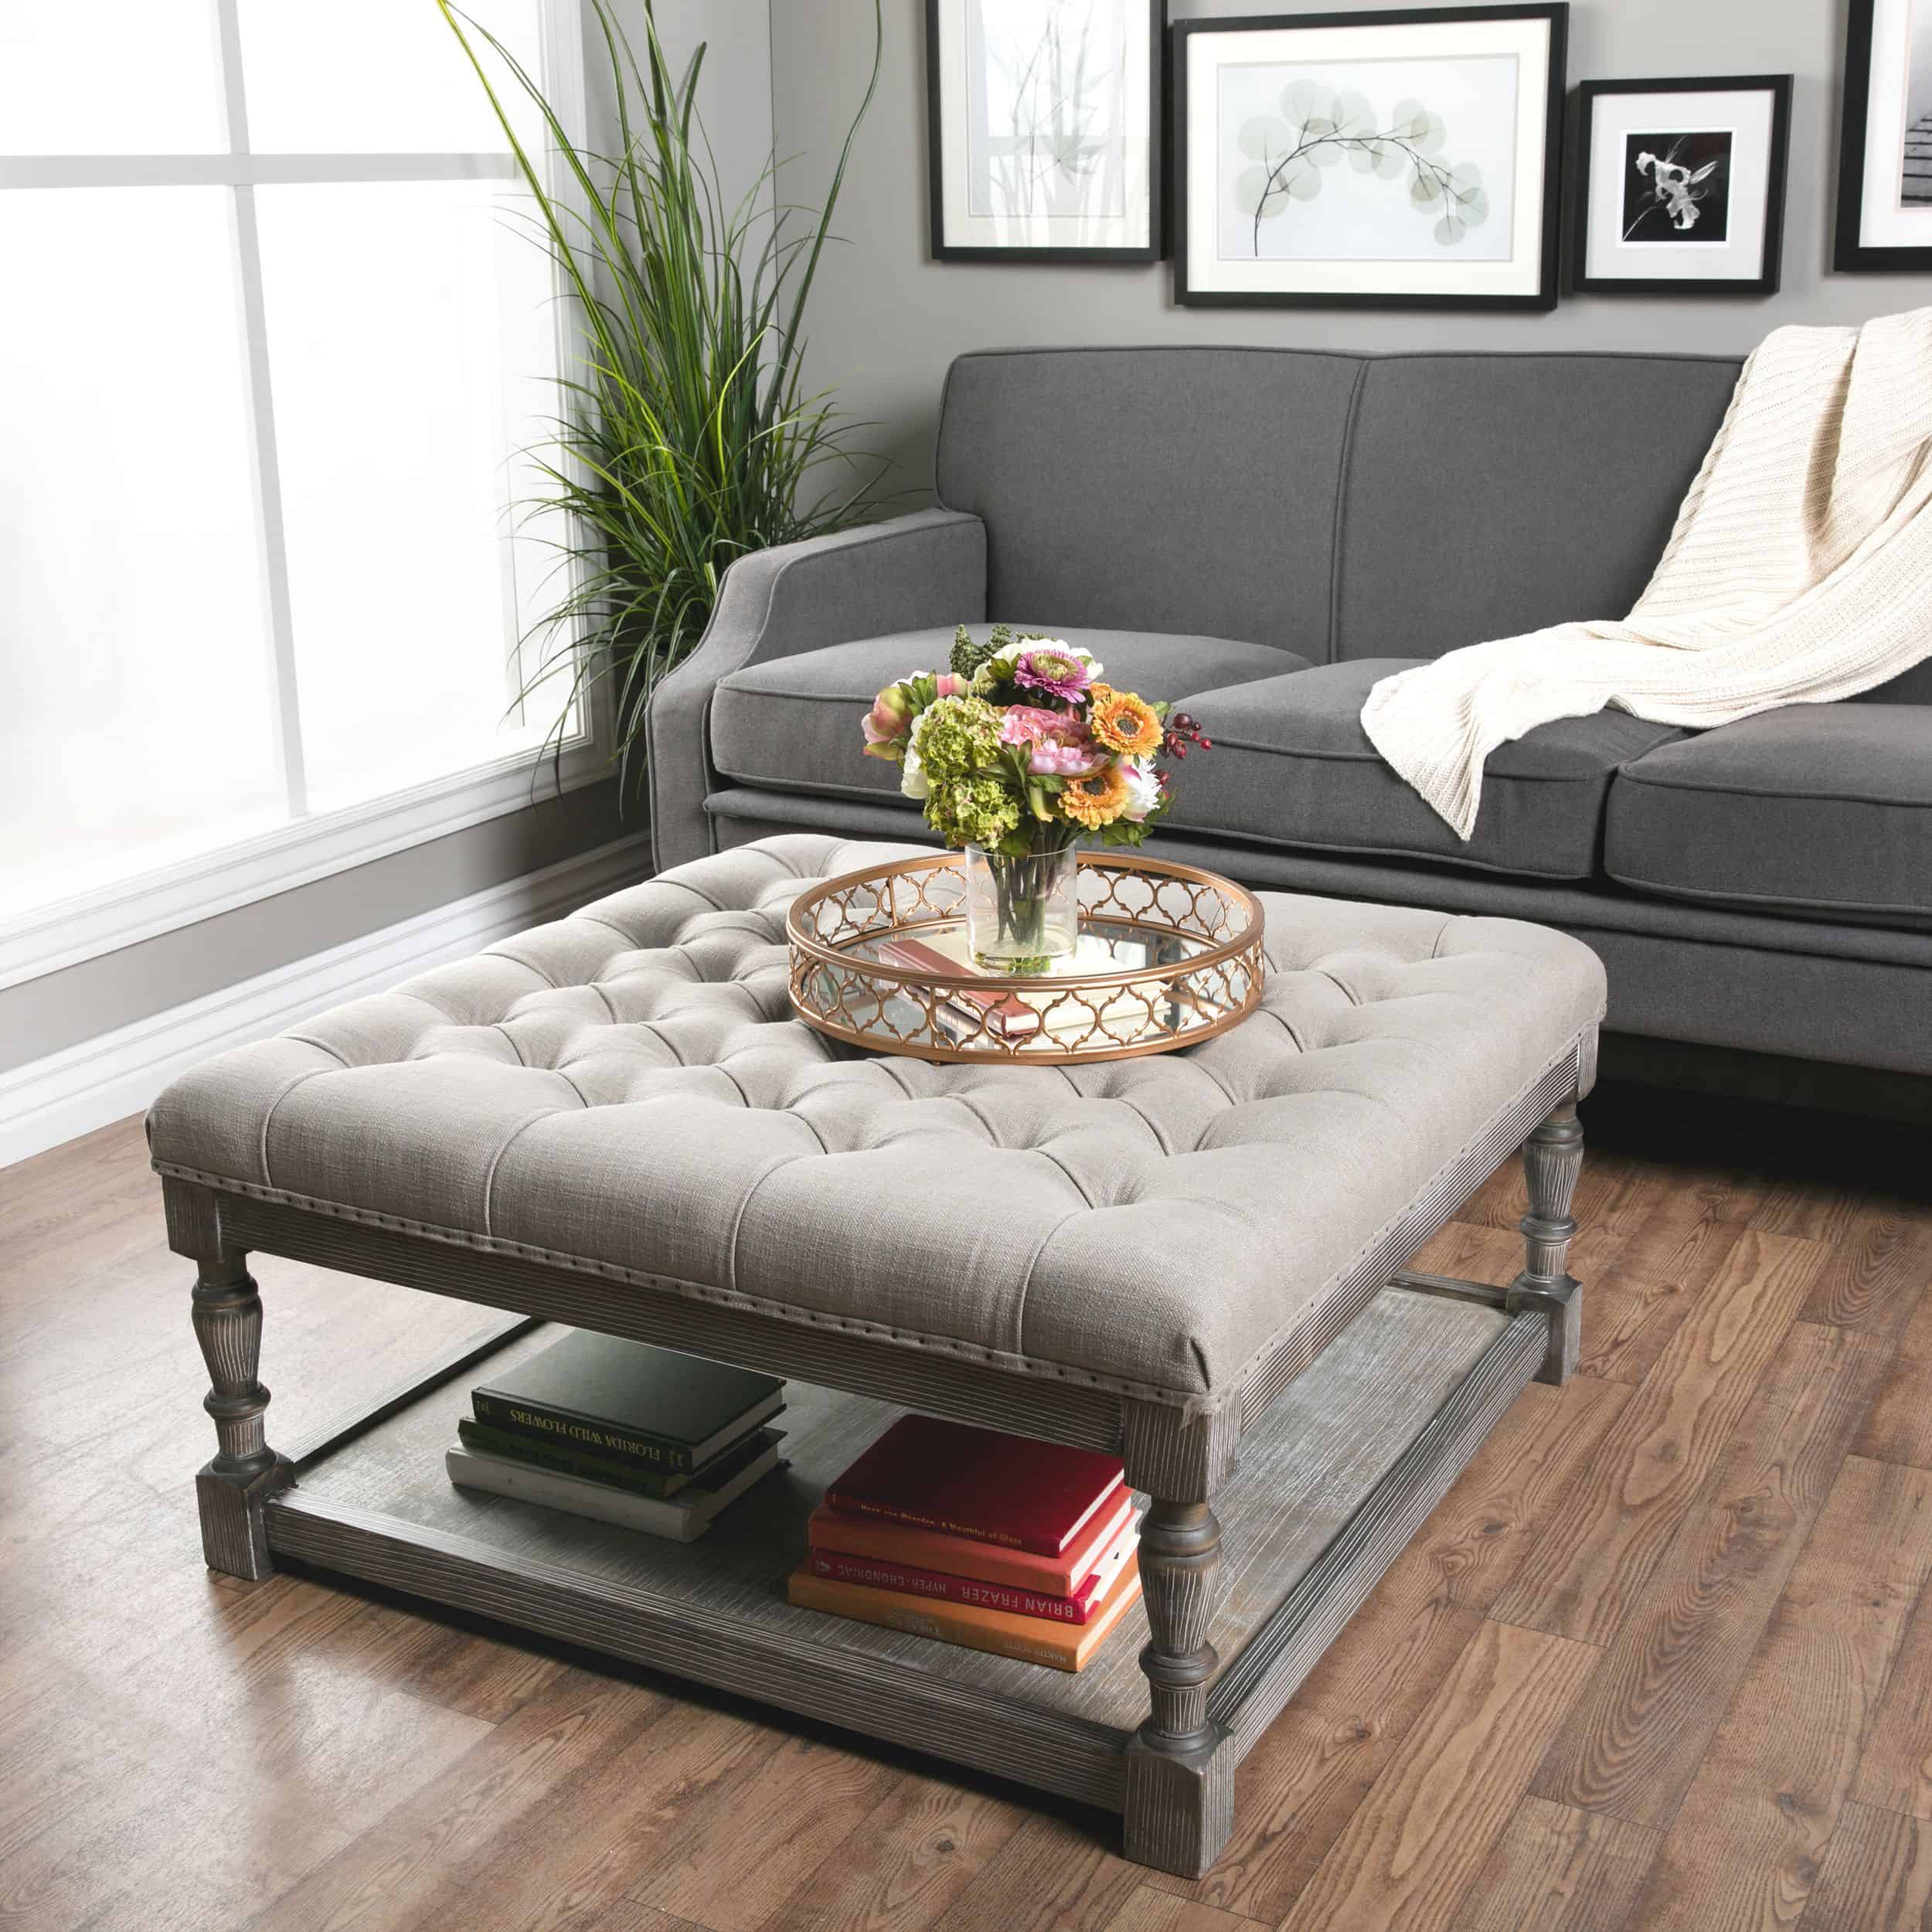 two coffee tables 12 Best Ways to Decorate a Coffee Table